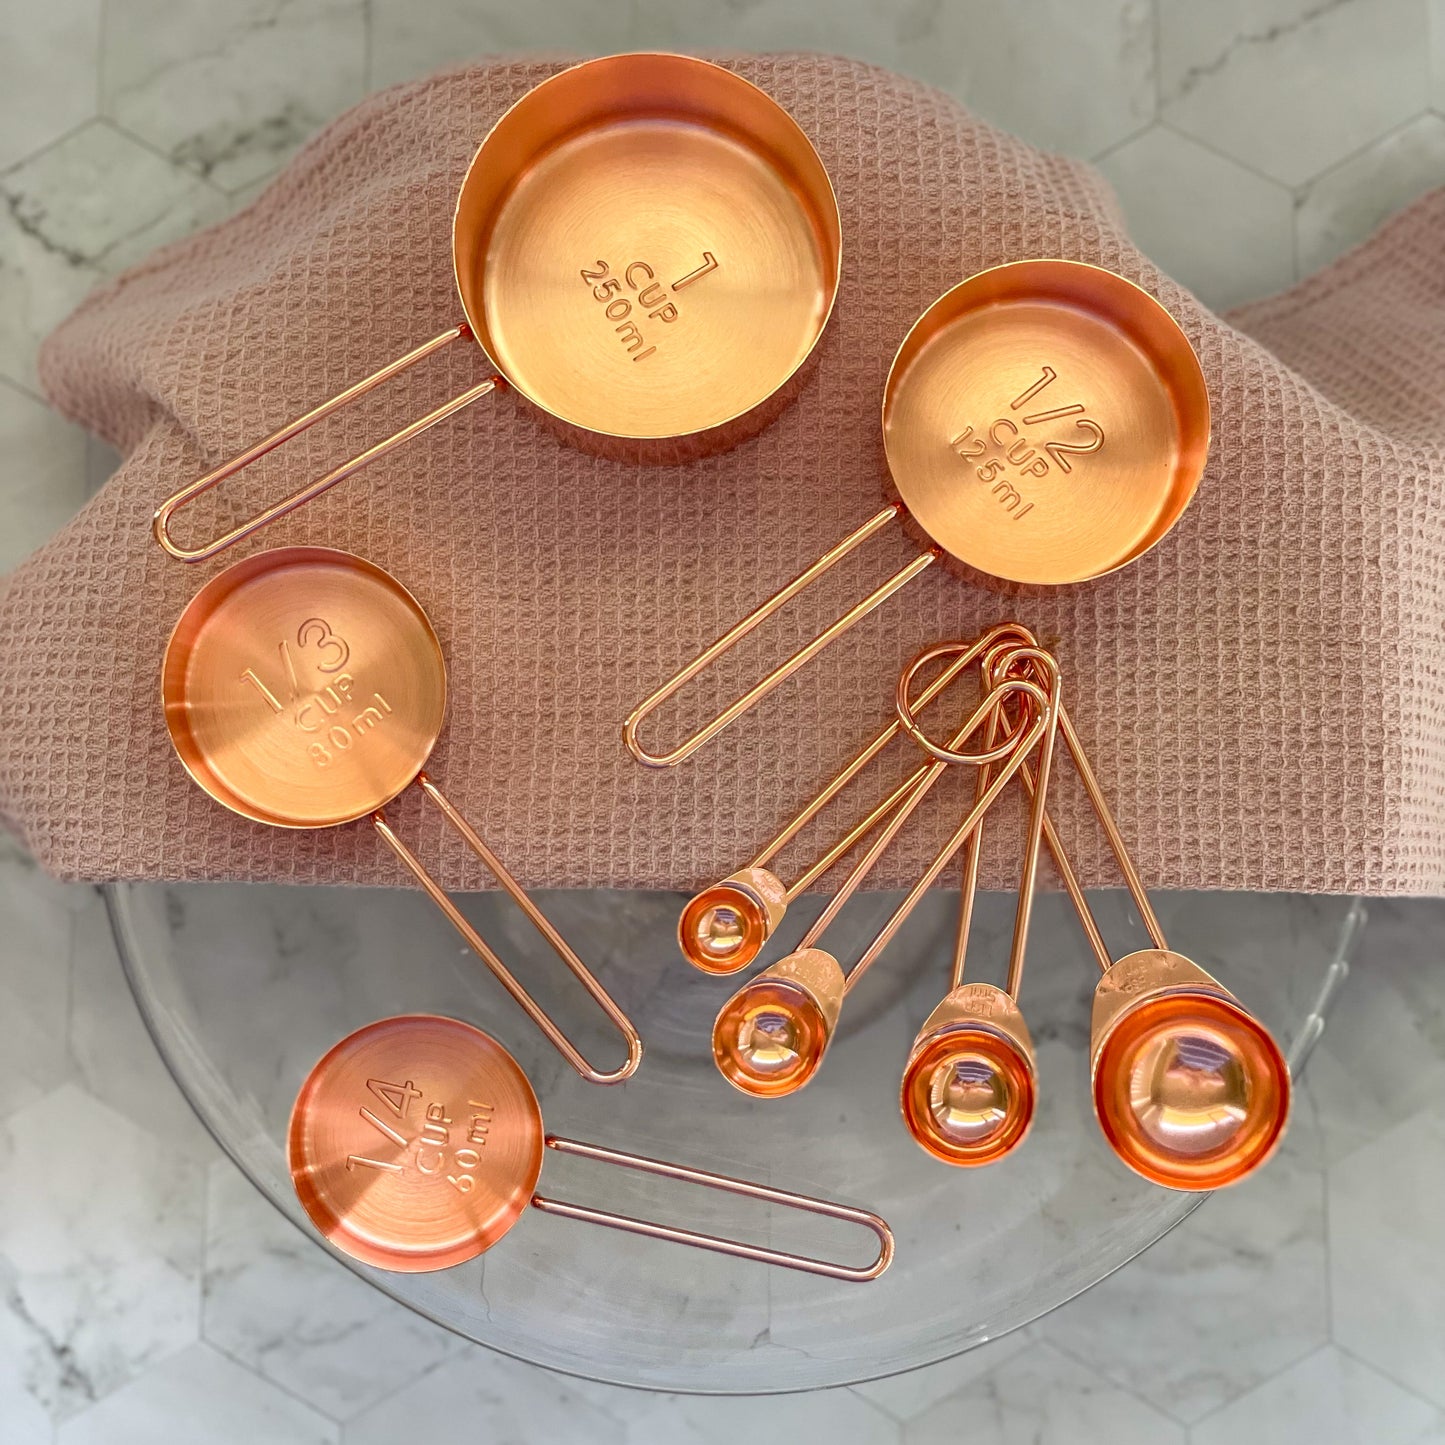 Rose Gold Measuring Cups & Spoons Set - Stainless Steel